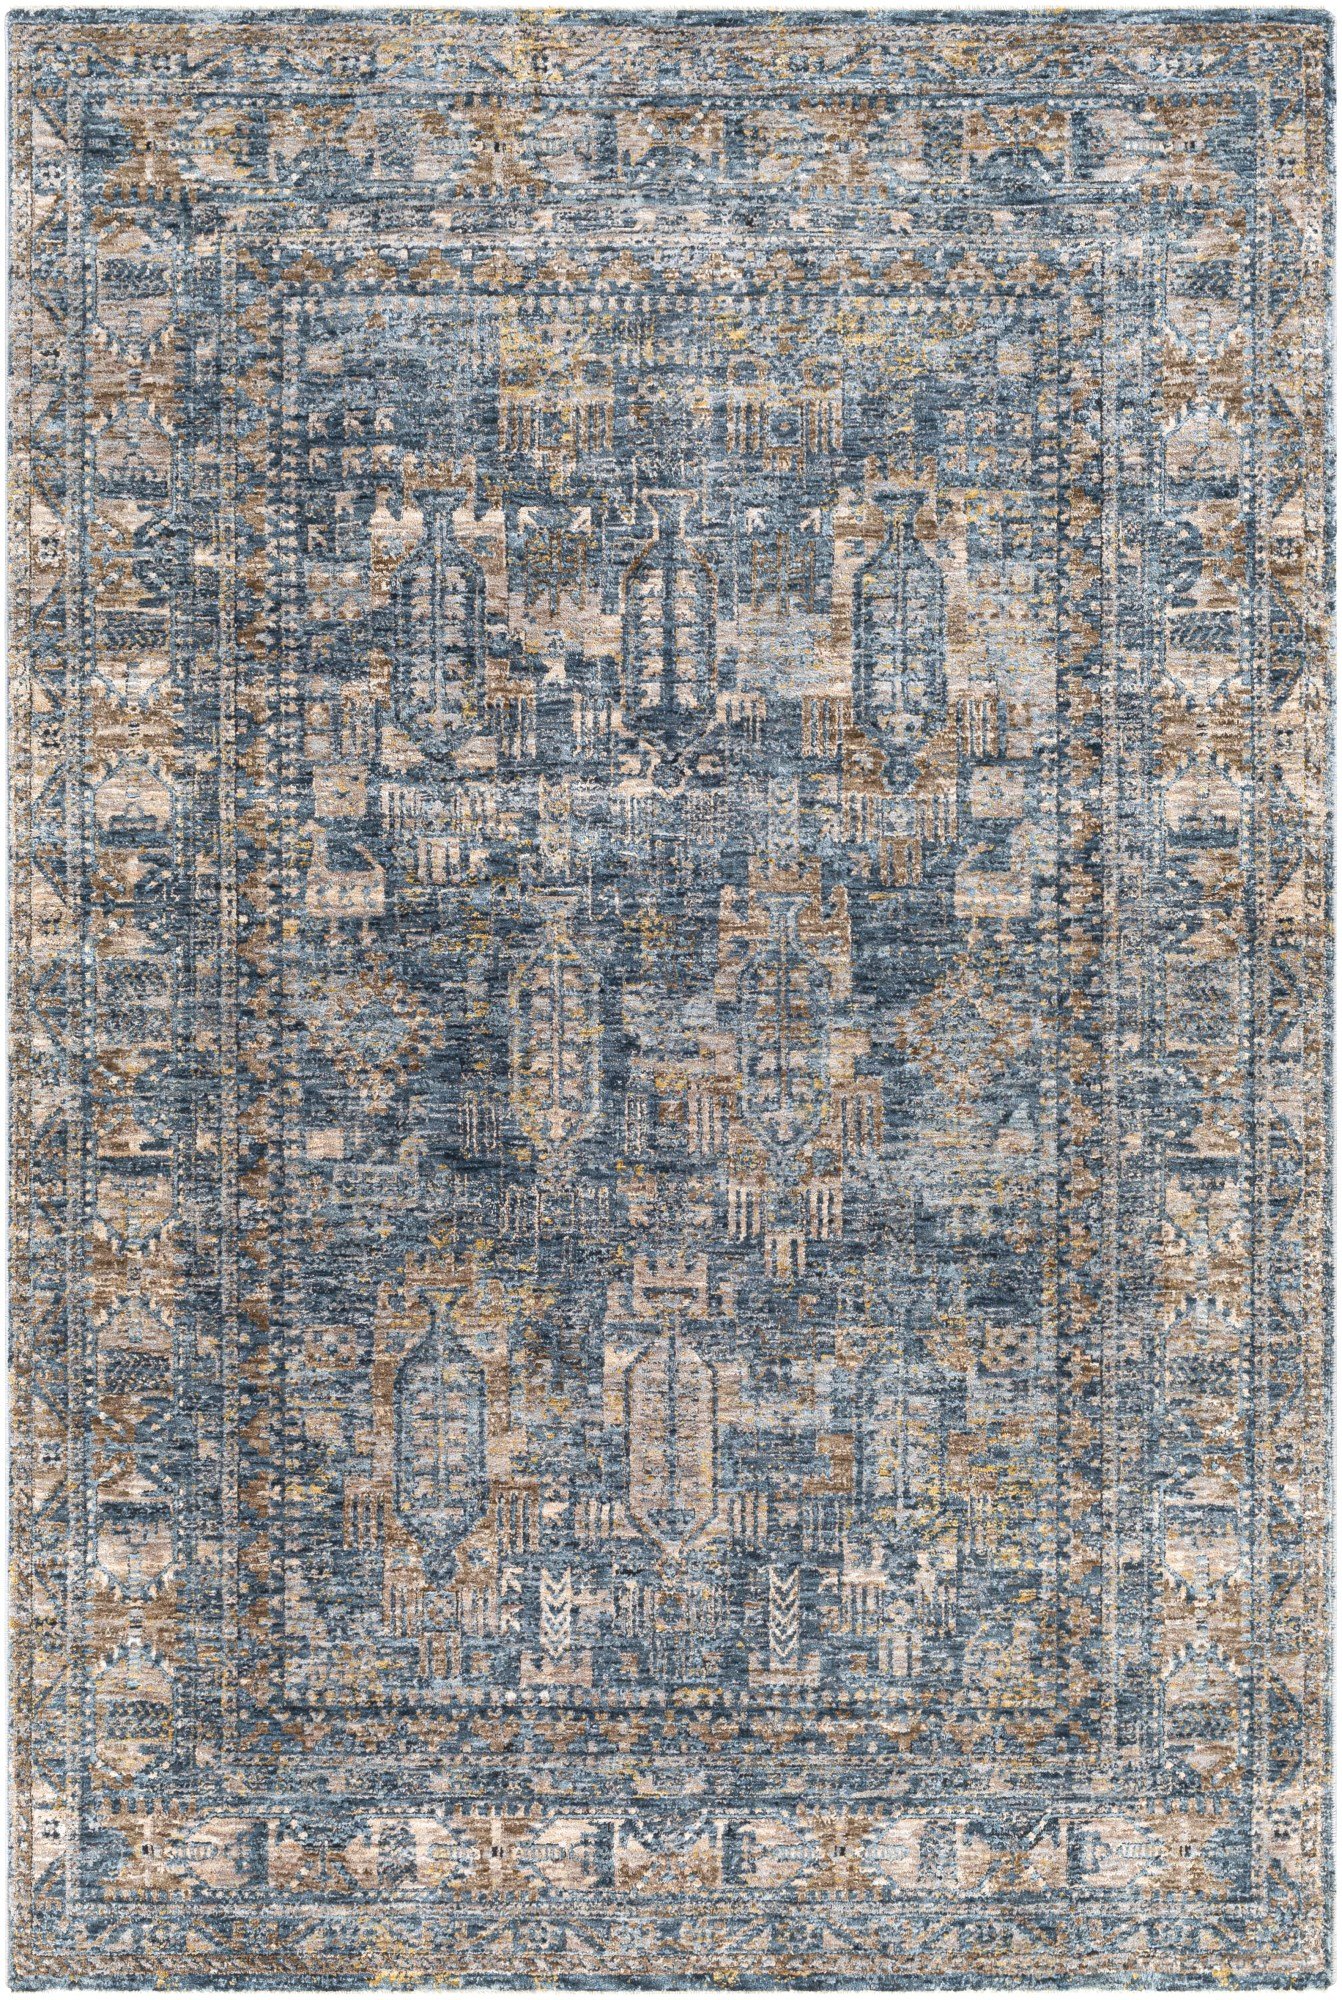 5x7 And 5x8 Blue Area Rugs Direct, Blue Area Rugs 5 215 7